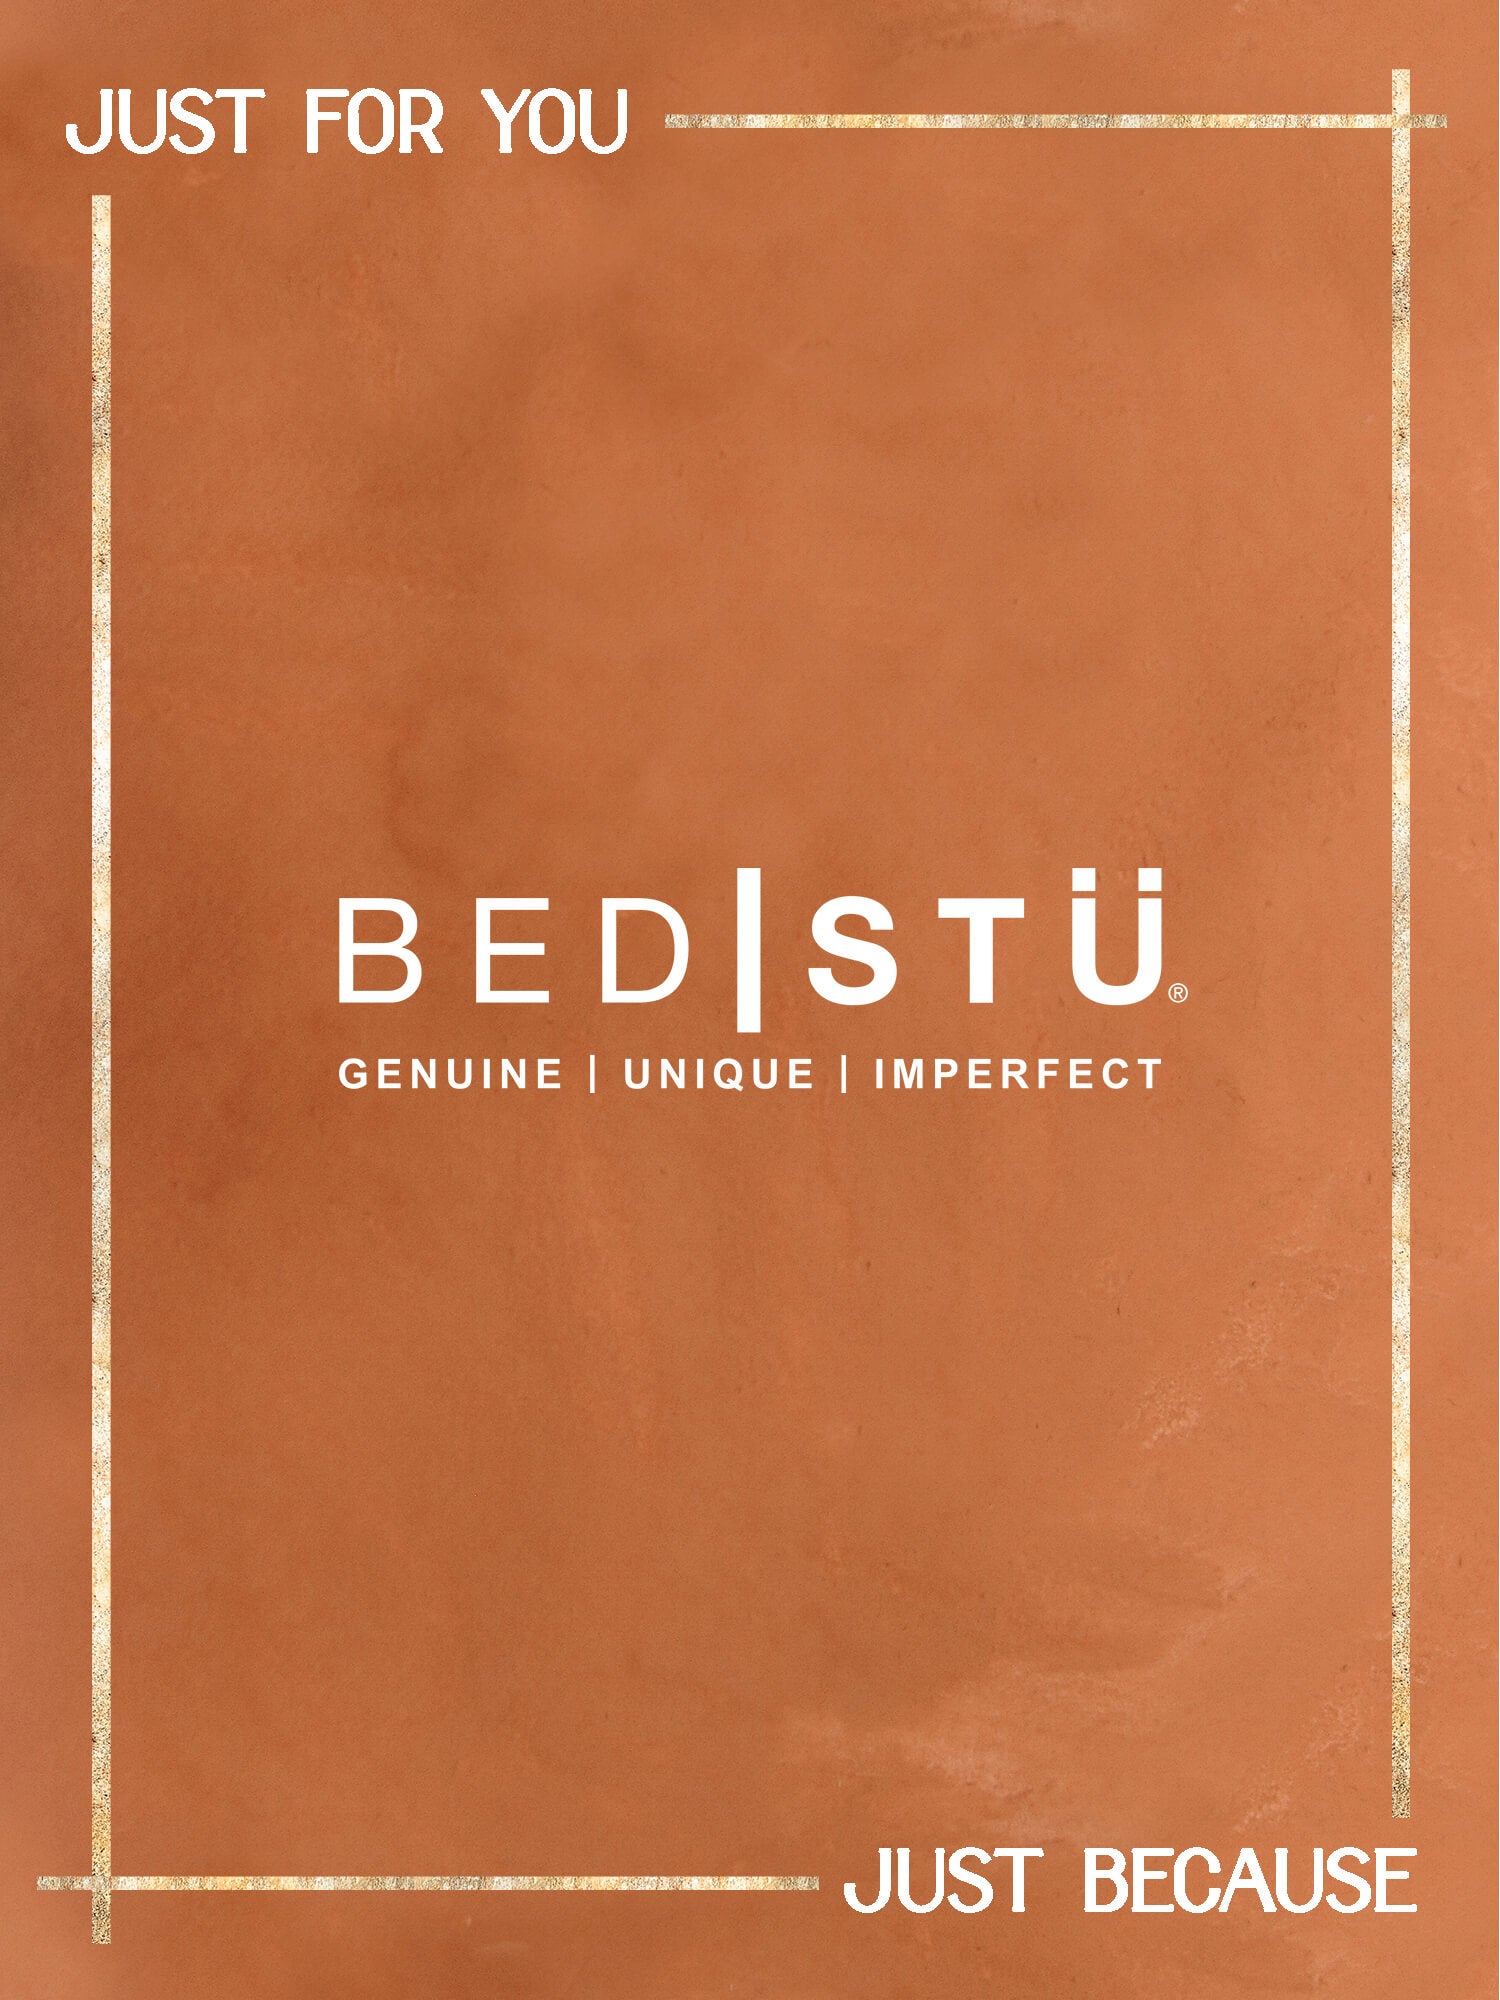 Bed|Stü - the Just For You for you.